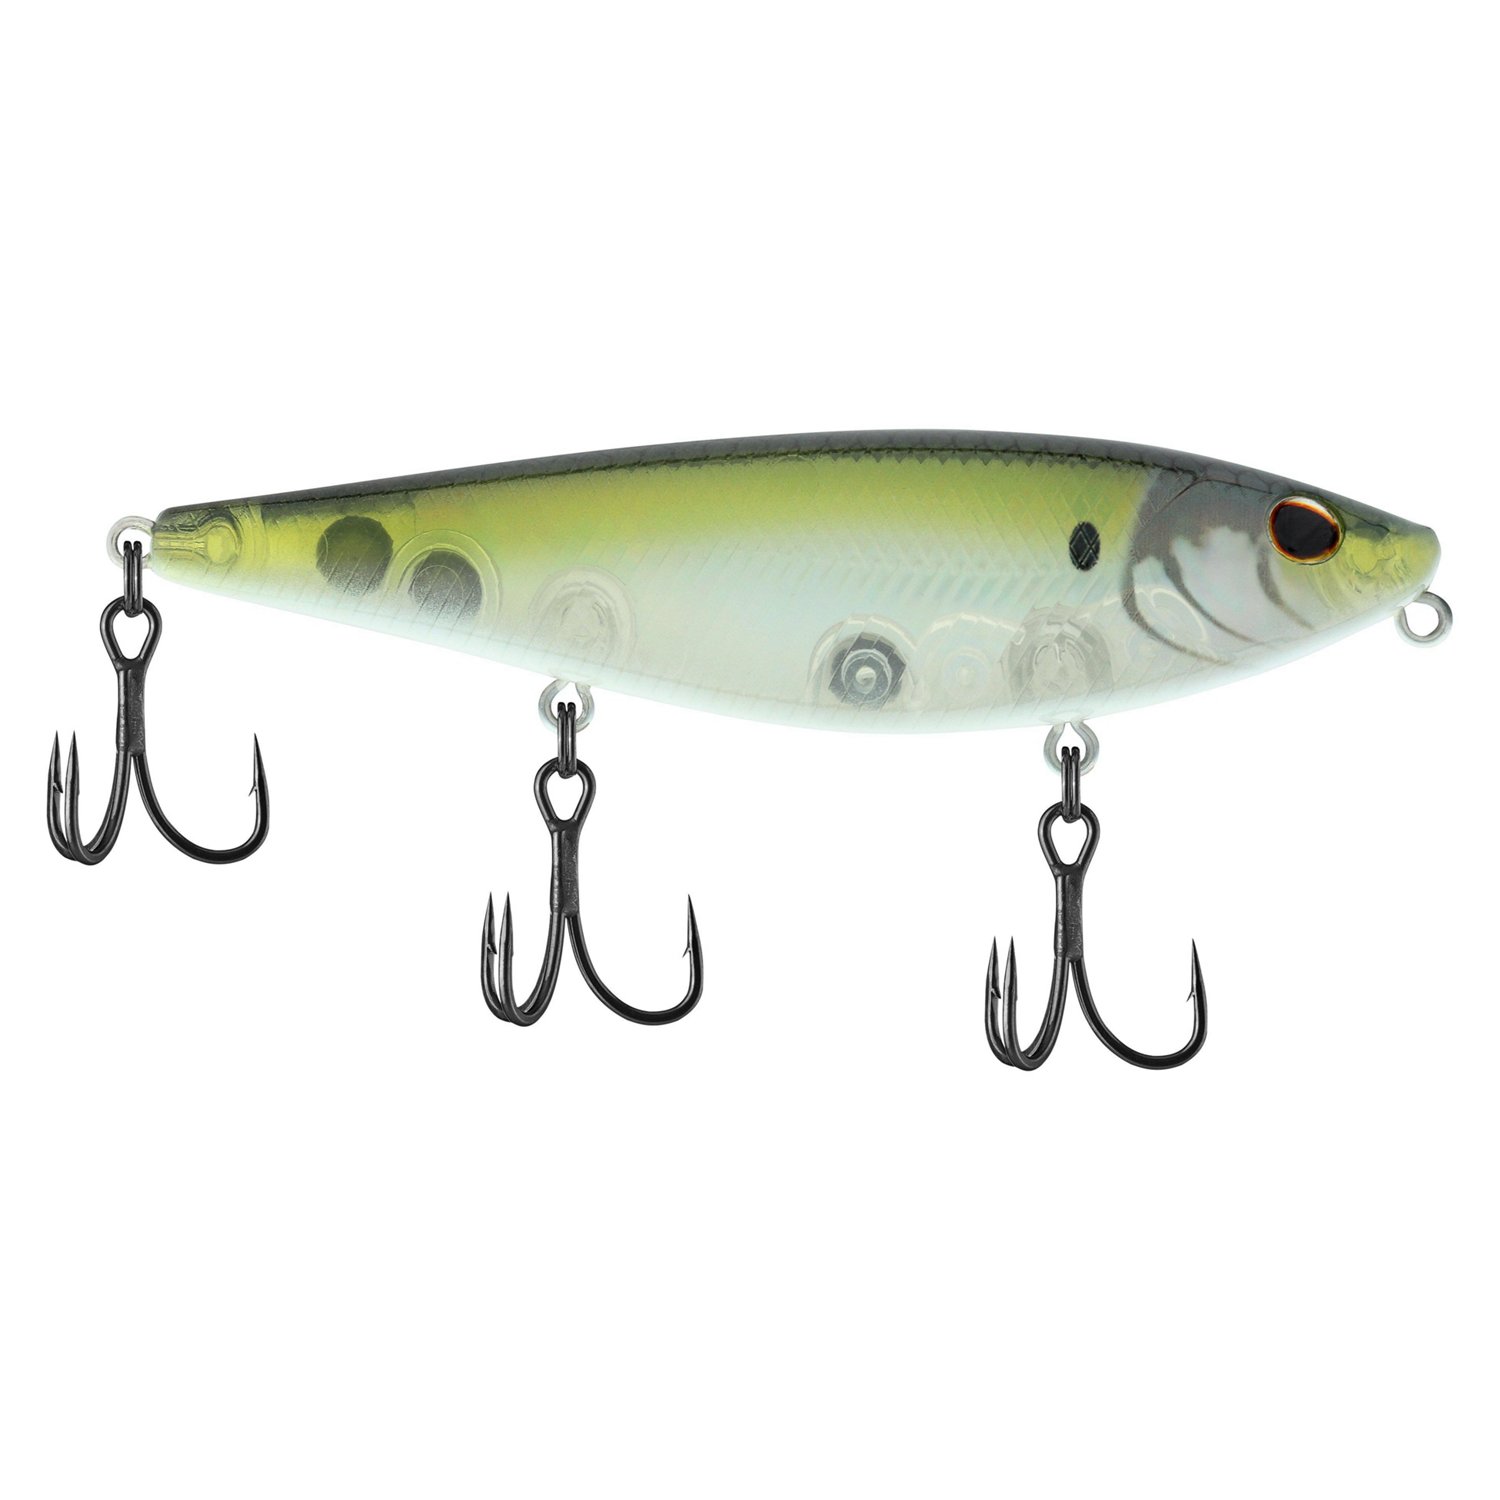 https://academy.scene7.com/is/image/academy//baits---lures/berkley-highjacker-100-saltwater-2/3-oz-topwater-baits-bhbswhj100-pil-pilchard/7b11cd061e2b4e64ad712cceb67bbc82?$pdp-gallery-ng$